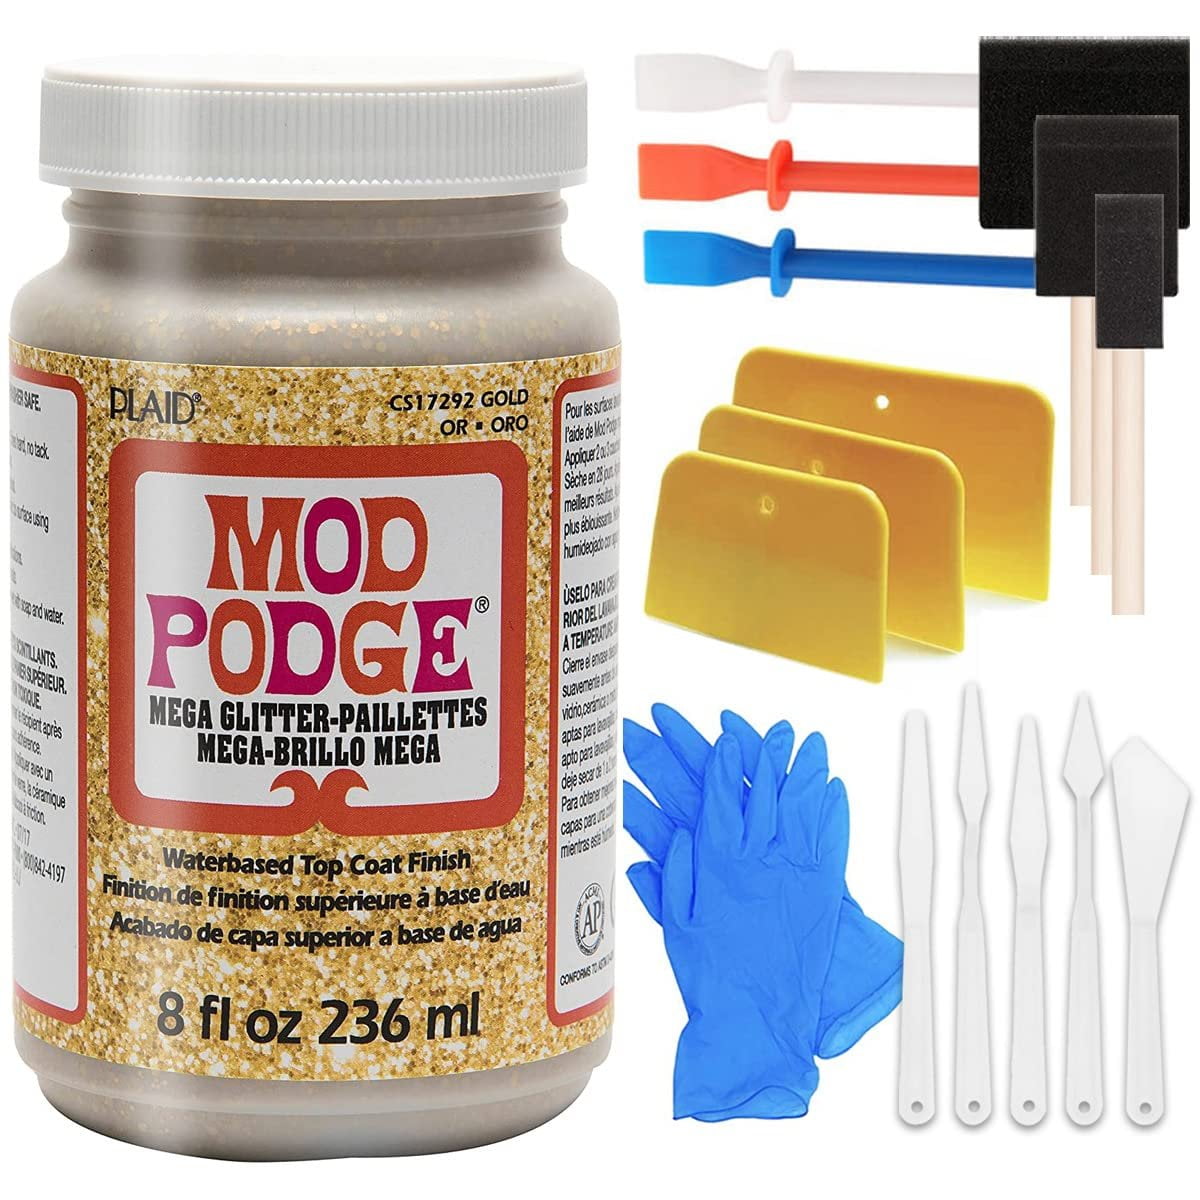 Mod Podge Puzzle Saver Glue Kit, Adhesive Brushes for Jigsaw Puzzles, Boards, Mats, with Pixiss Accessory Kit